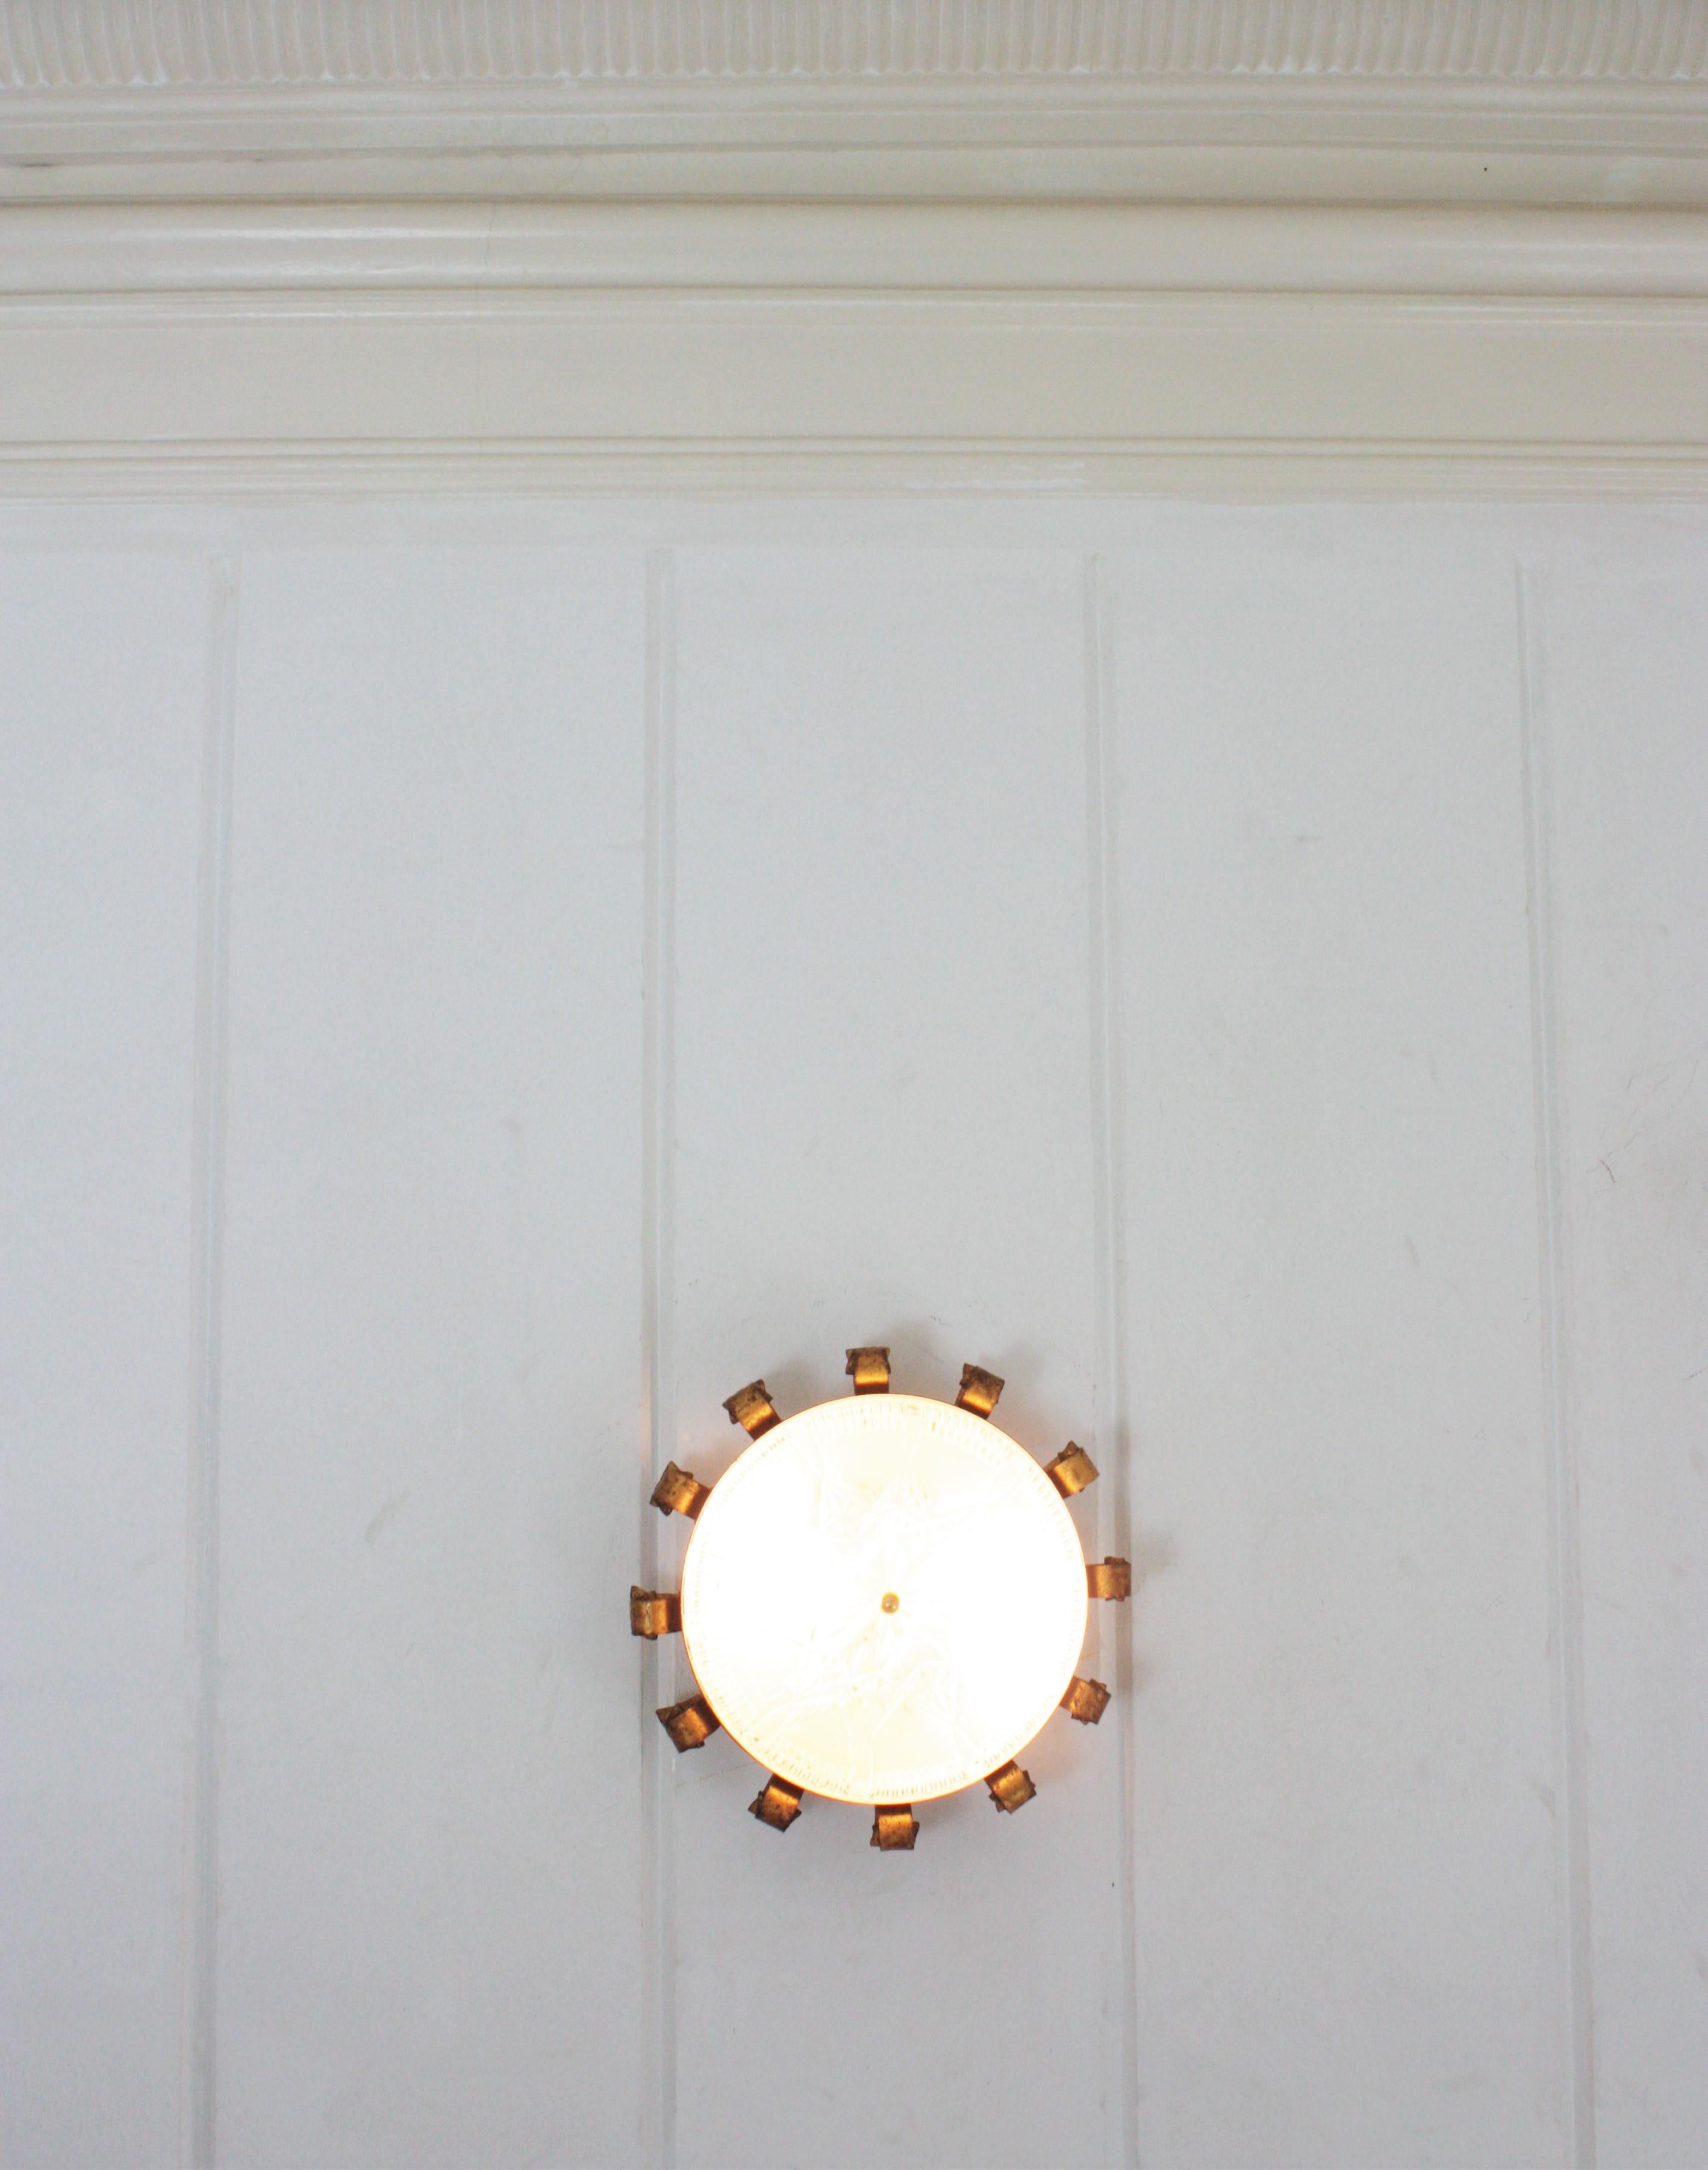 Sunburst Crown Light Fixture in Gilt Iron and Pressed Glass 2